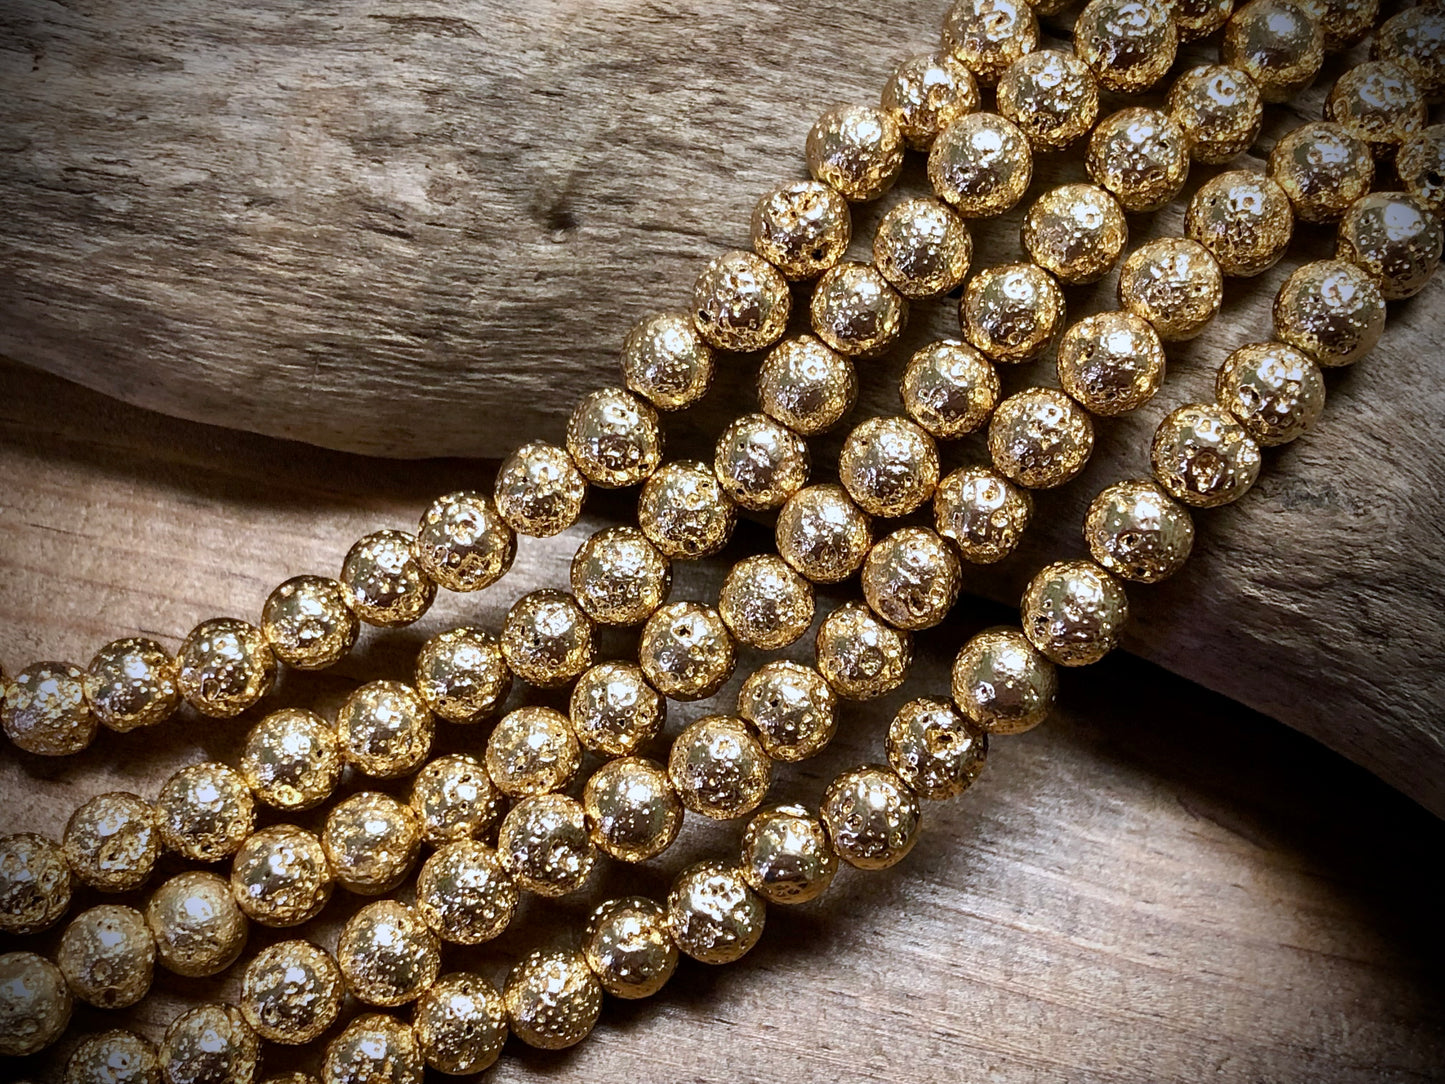 Electro-Coated Lava Bead Strand - Pale Gold - 6mm - 8”